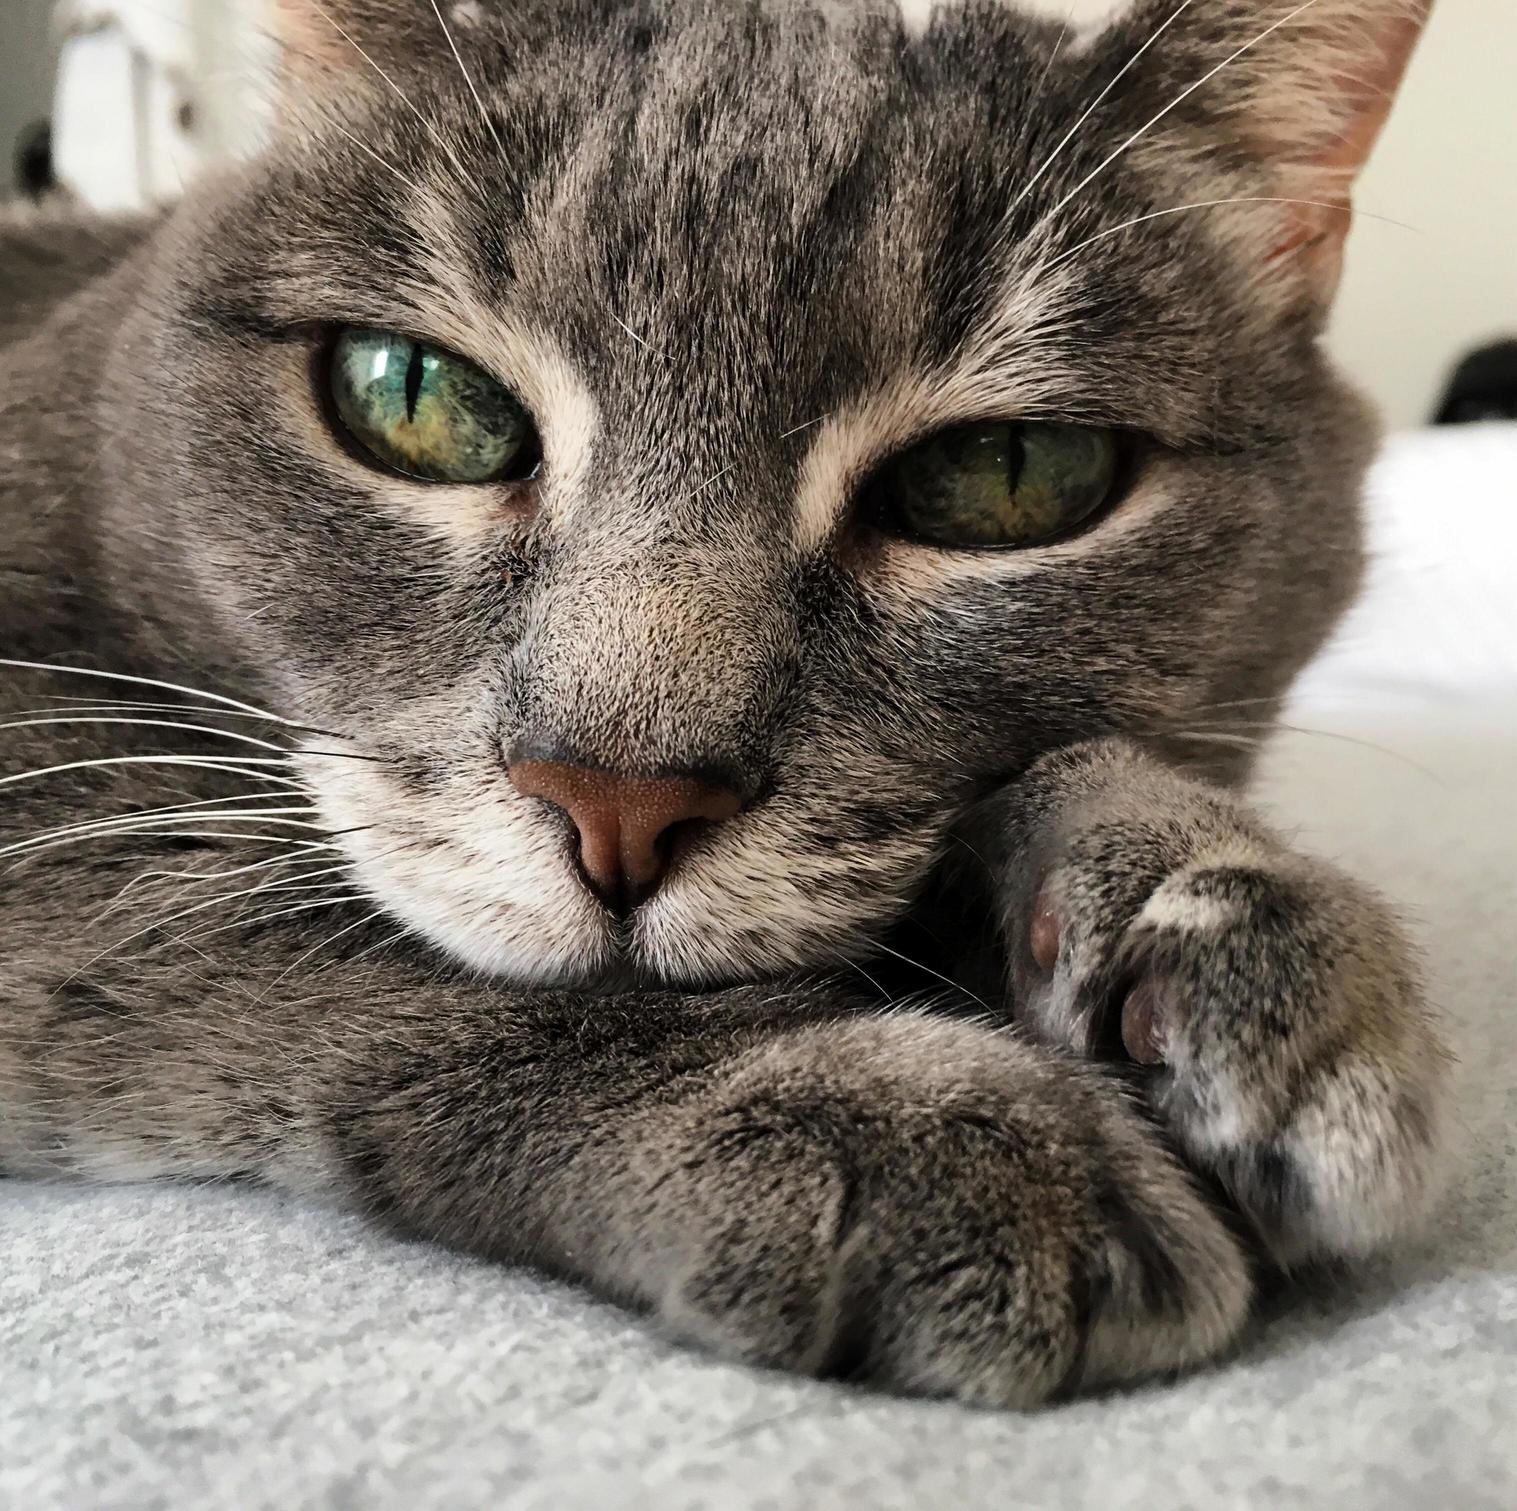 Say hi to misty – 15 years young galaxy eyed beauty